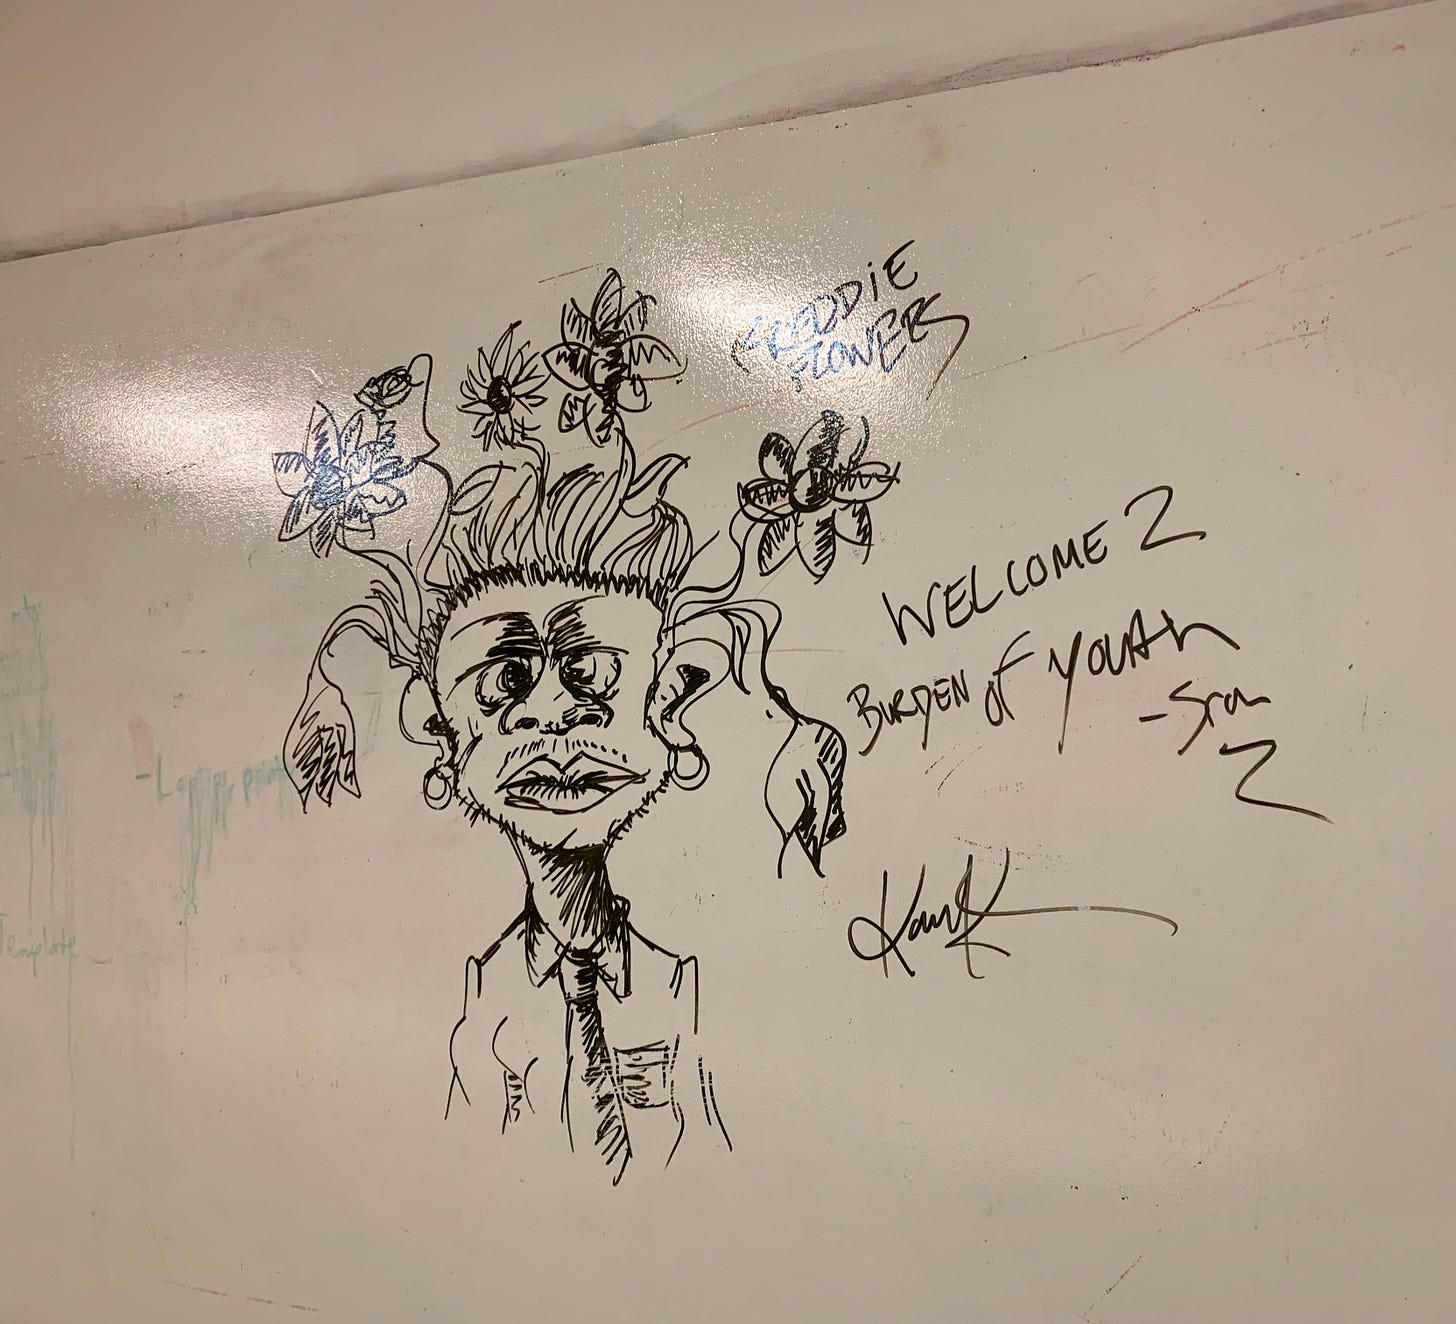 an illustrated image created on a whiteboard with a black dry erase marker. the image resembles a masculine-presenting character with flowers for hair. the character's face is expressionless and they're wearing a button up with a tie and hoop earrings. Character's name: Freddie Flowers. Add'l text reads: Welcome 2 Burden of Youth